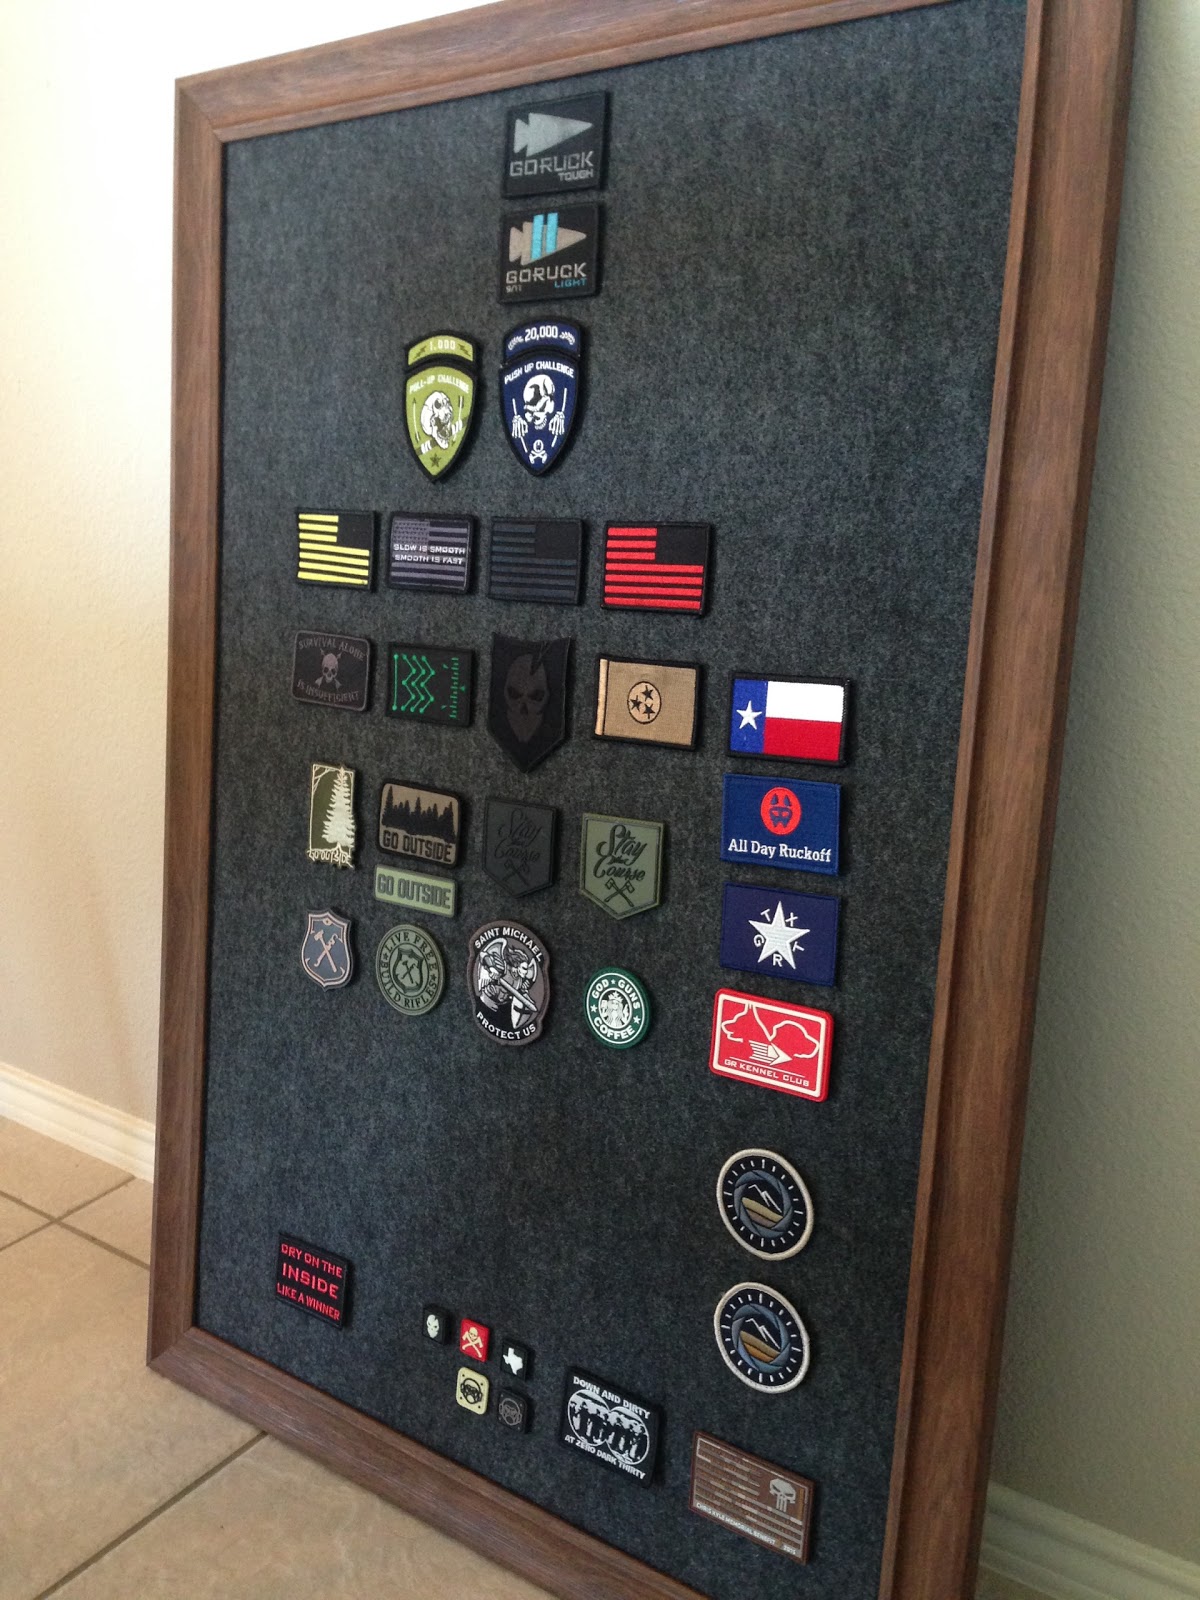 How to: make a morale patch board